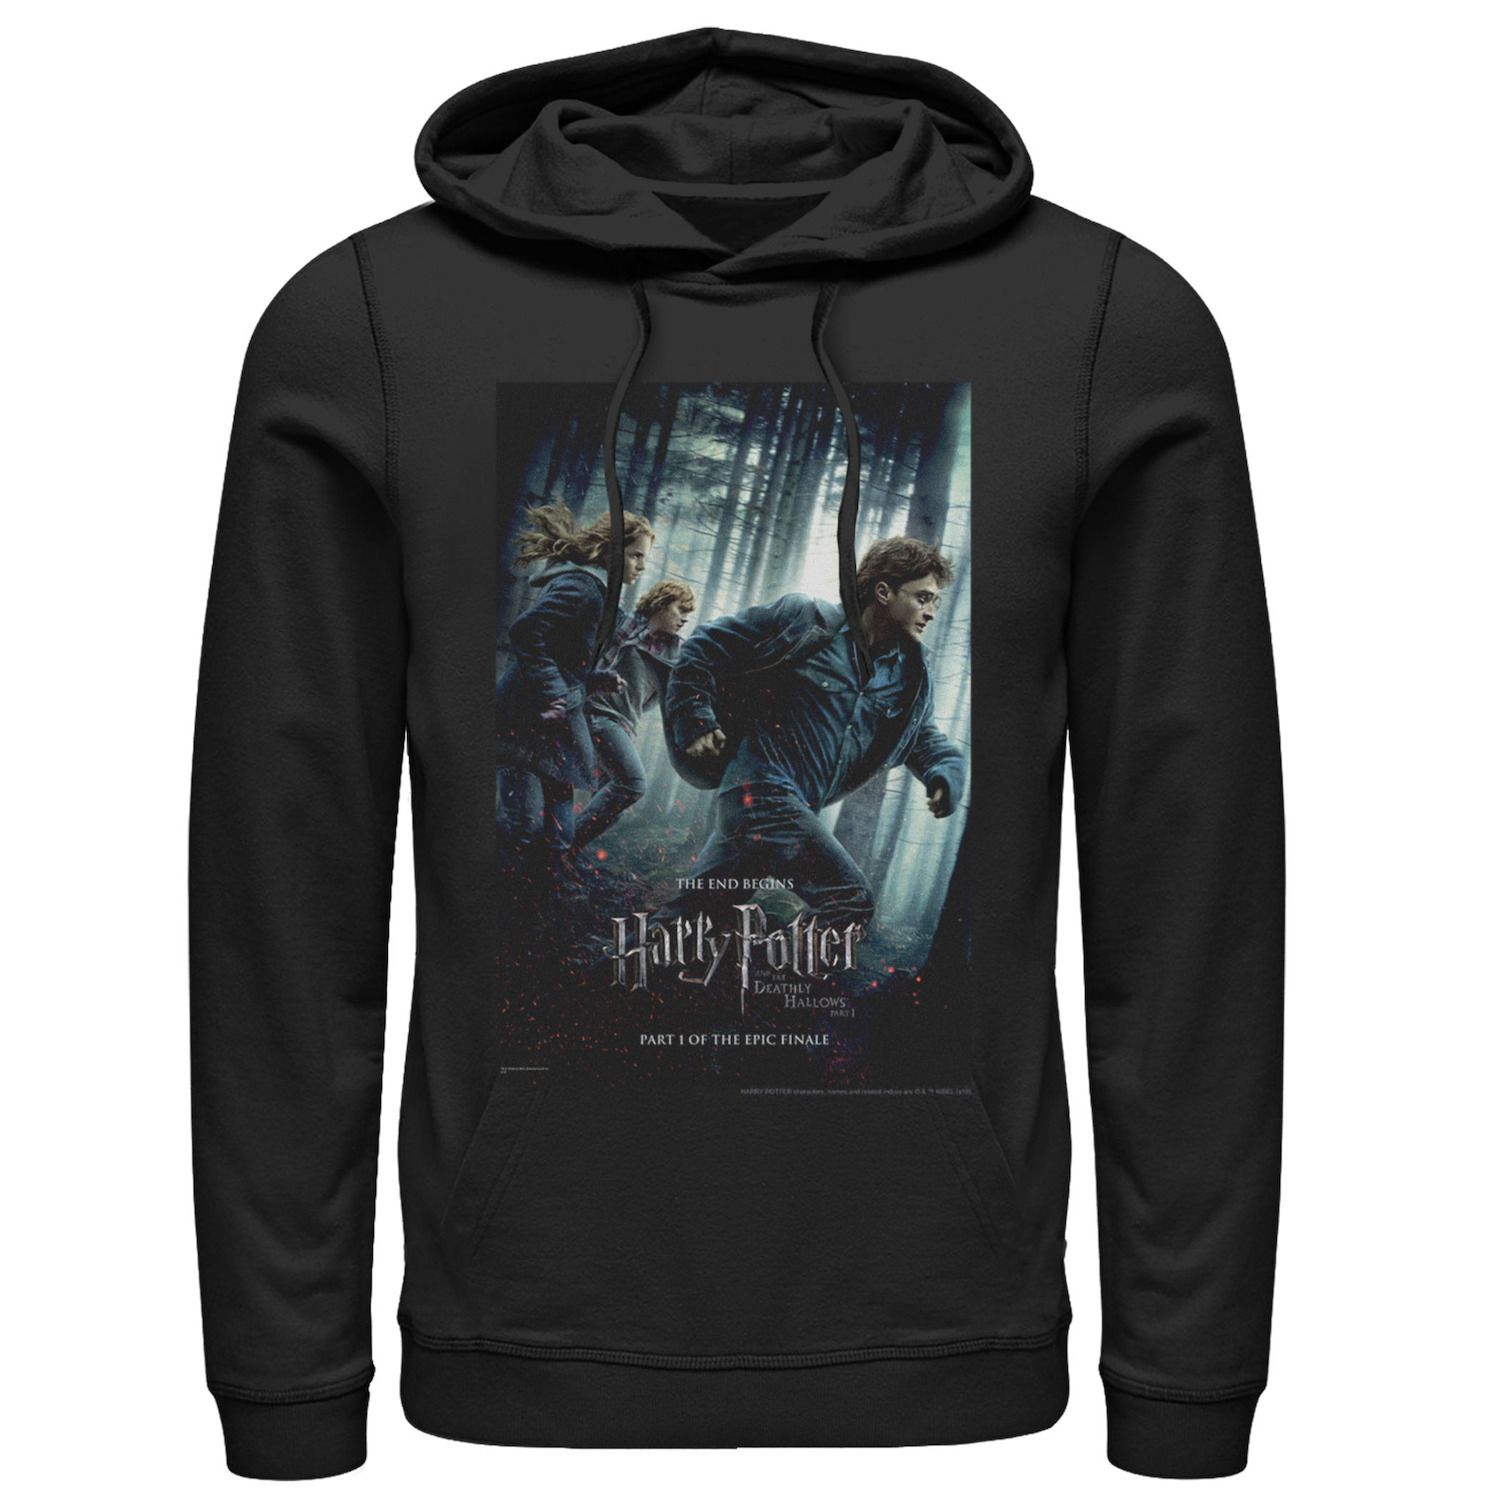 Image for Harry Potter Men's Deathly Hallows Group Shot Poster Graphic Pullover Hoodie at Kohl's.